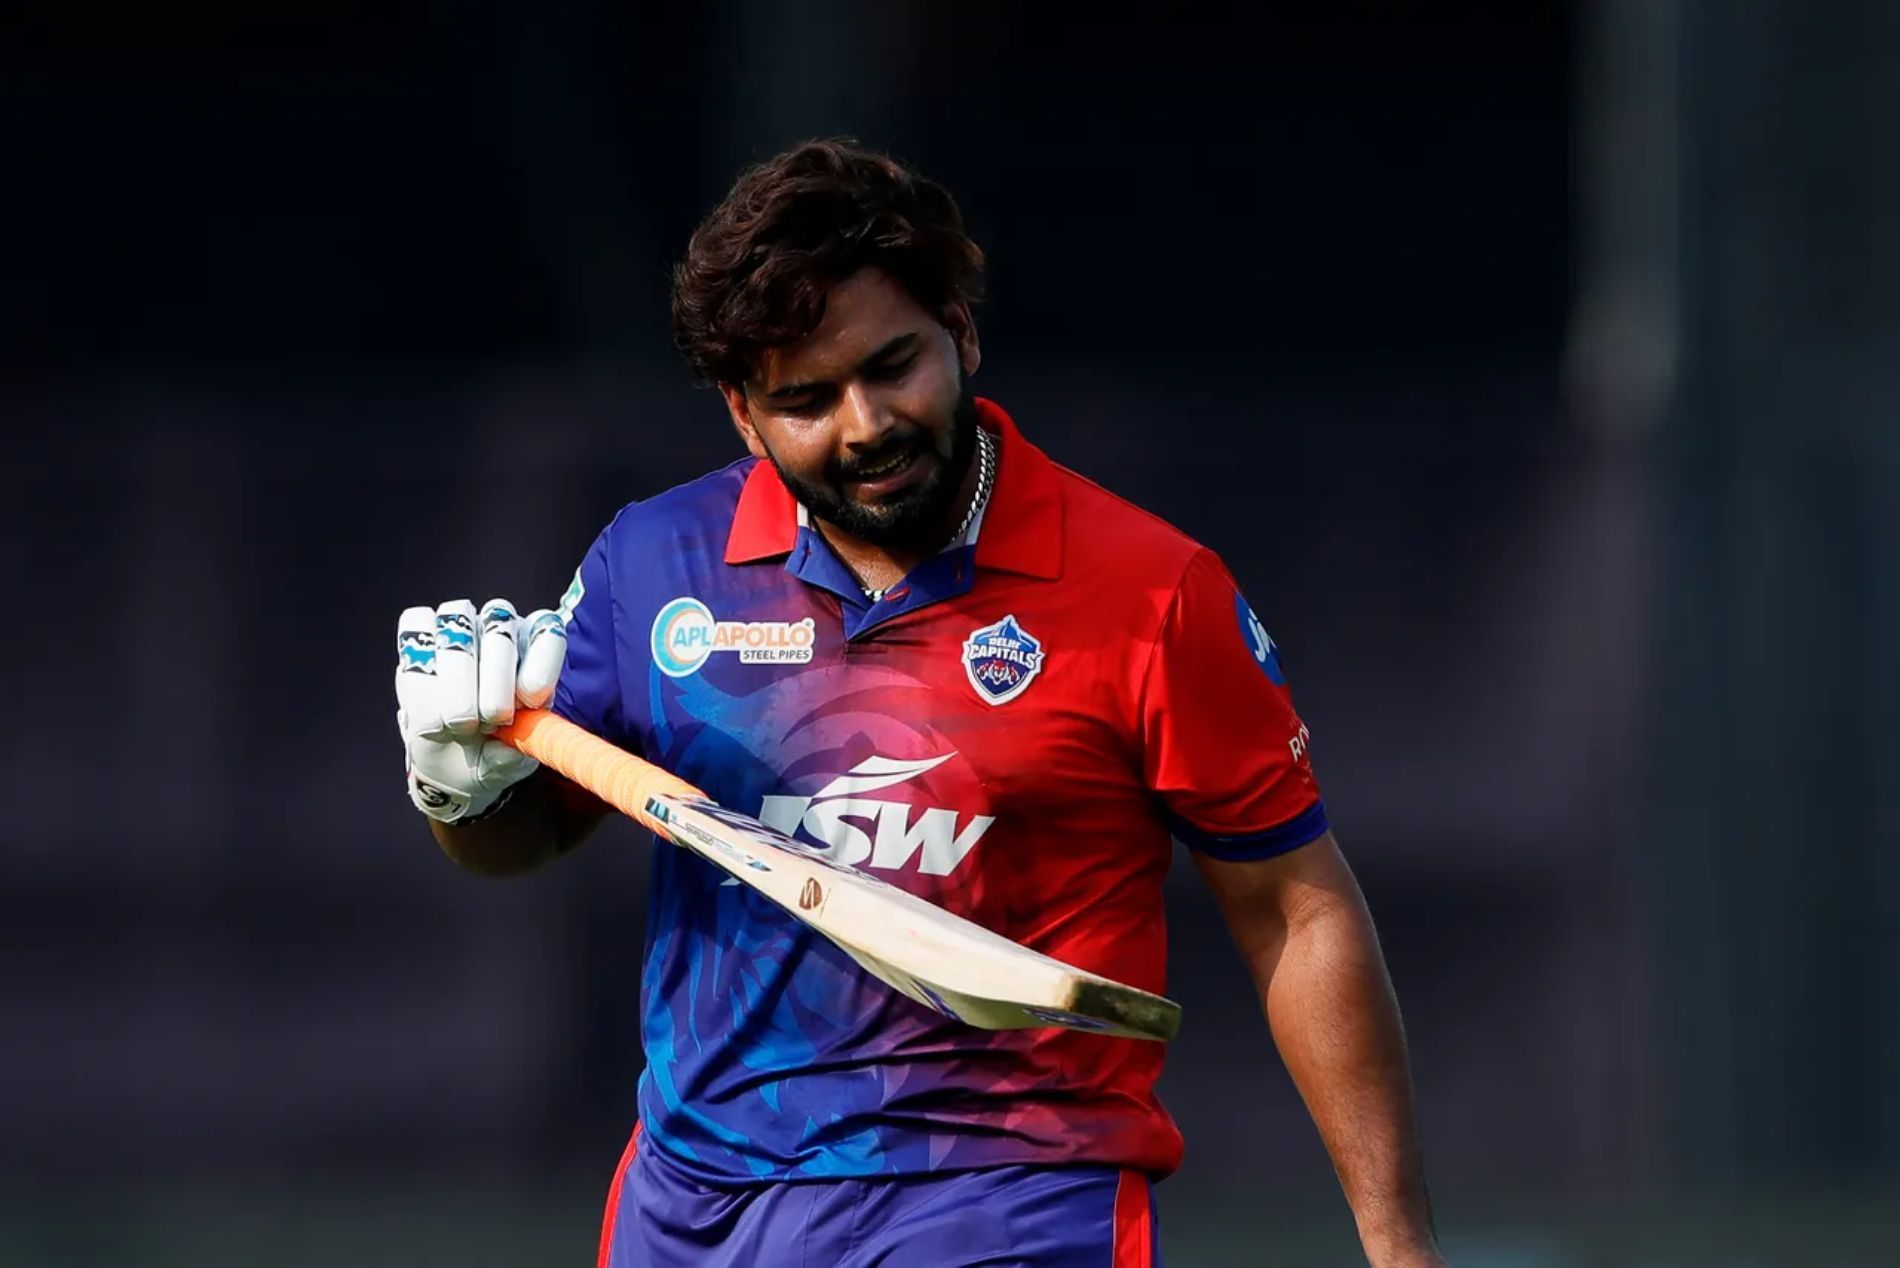 The DC captain has been struggling for fluency in IPL 2022. After four matches, he has 110 runs to his name at an average of 36.67 and a strike rate of 135.8.